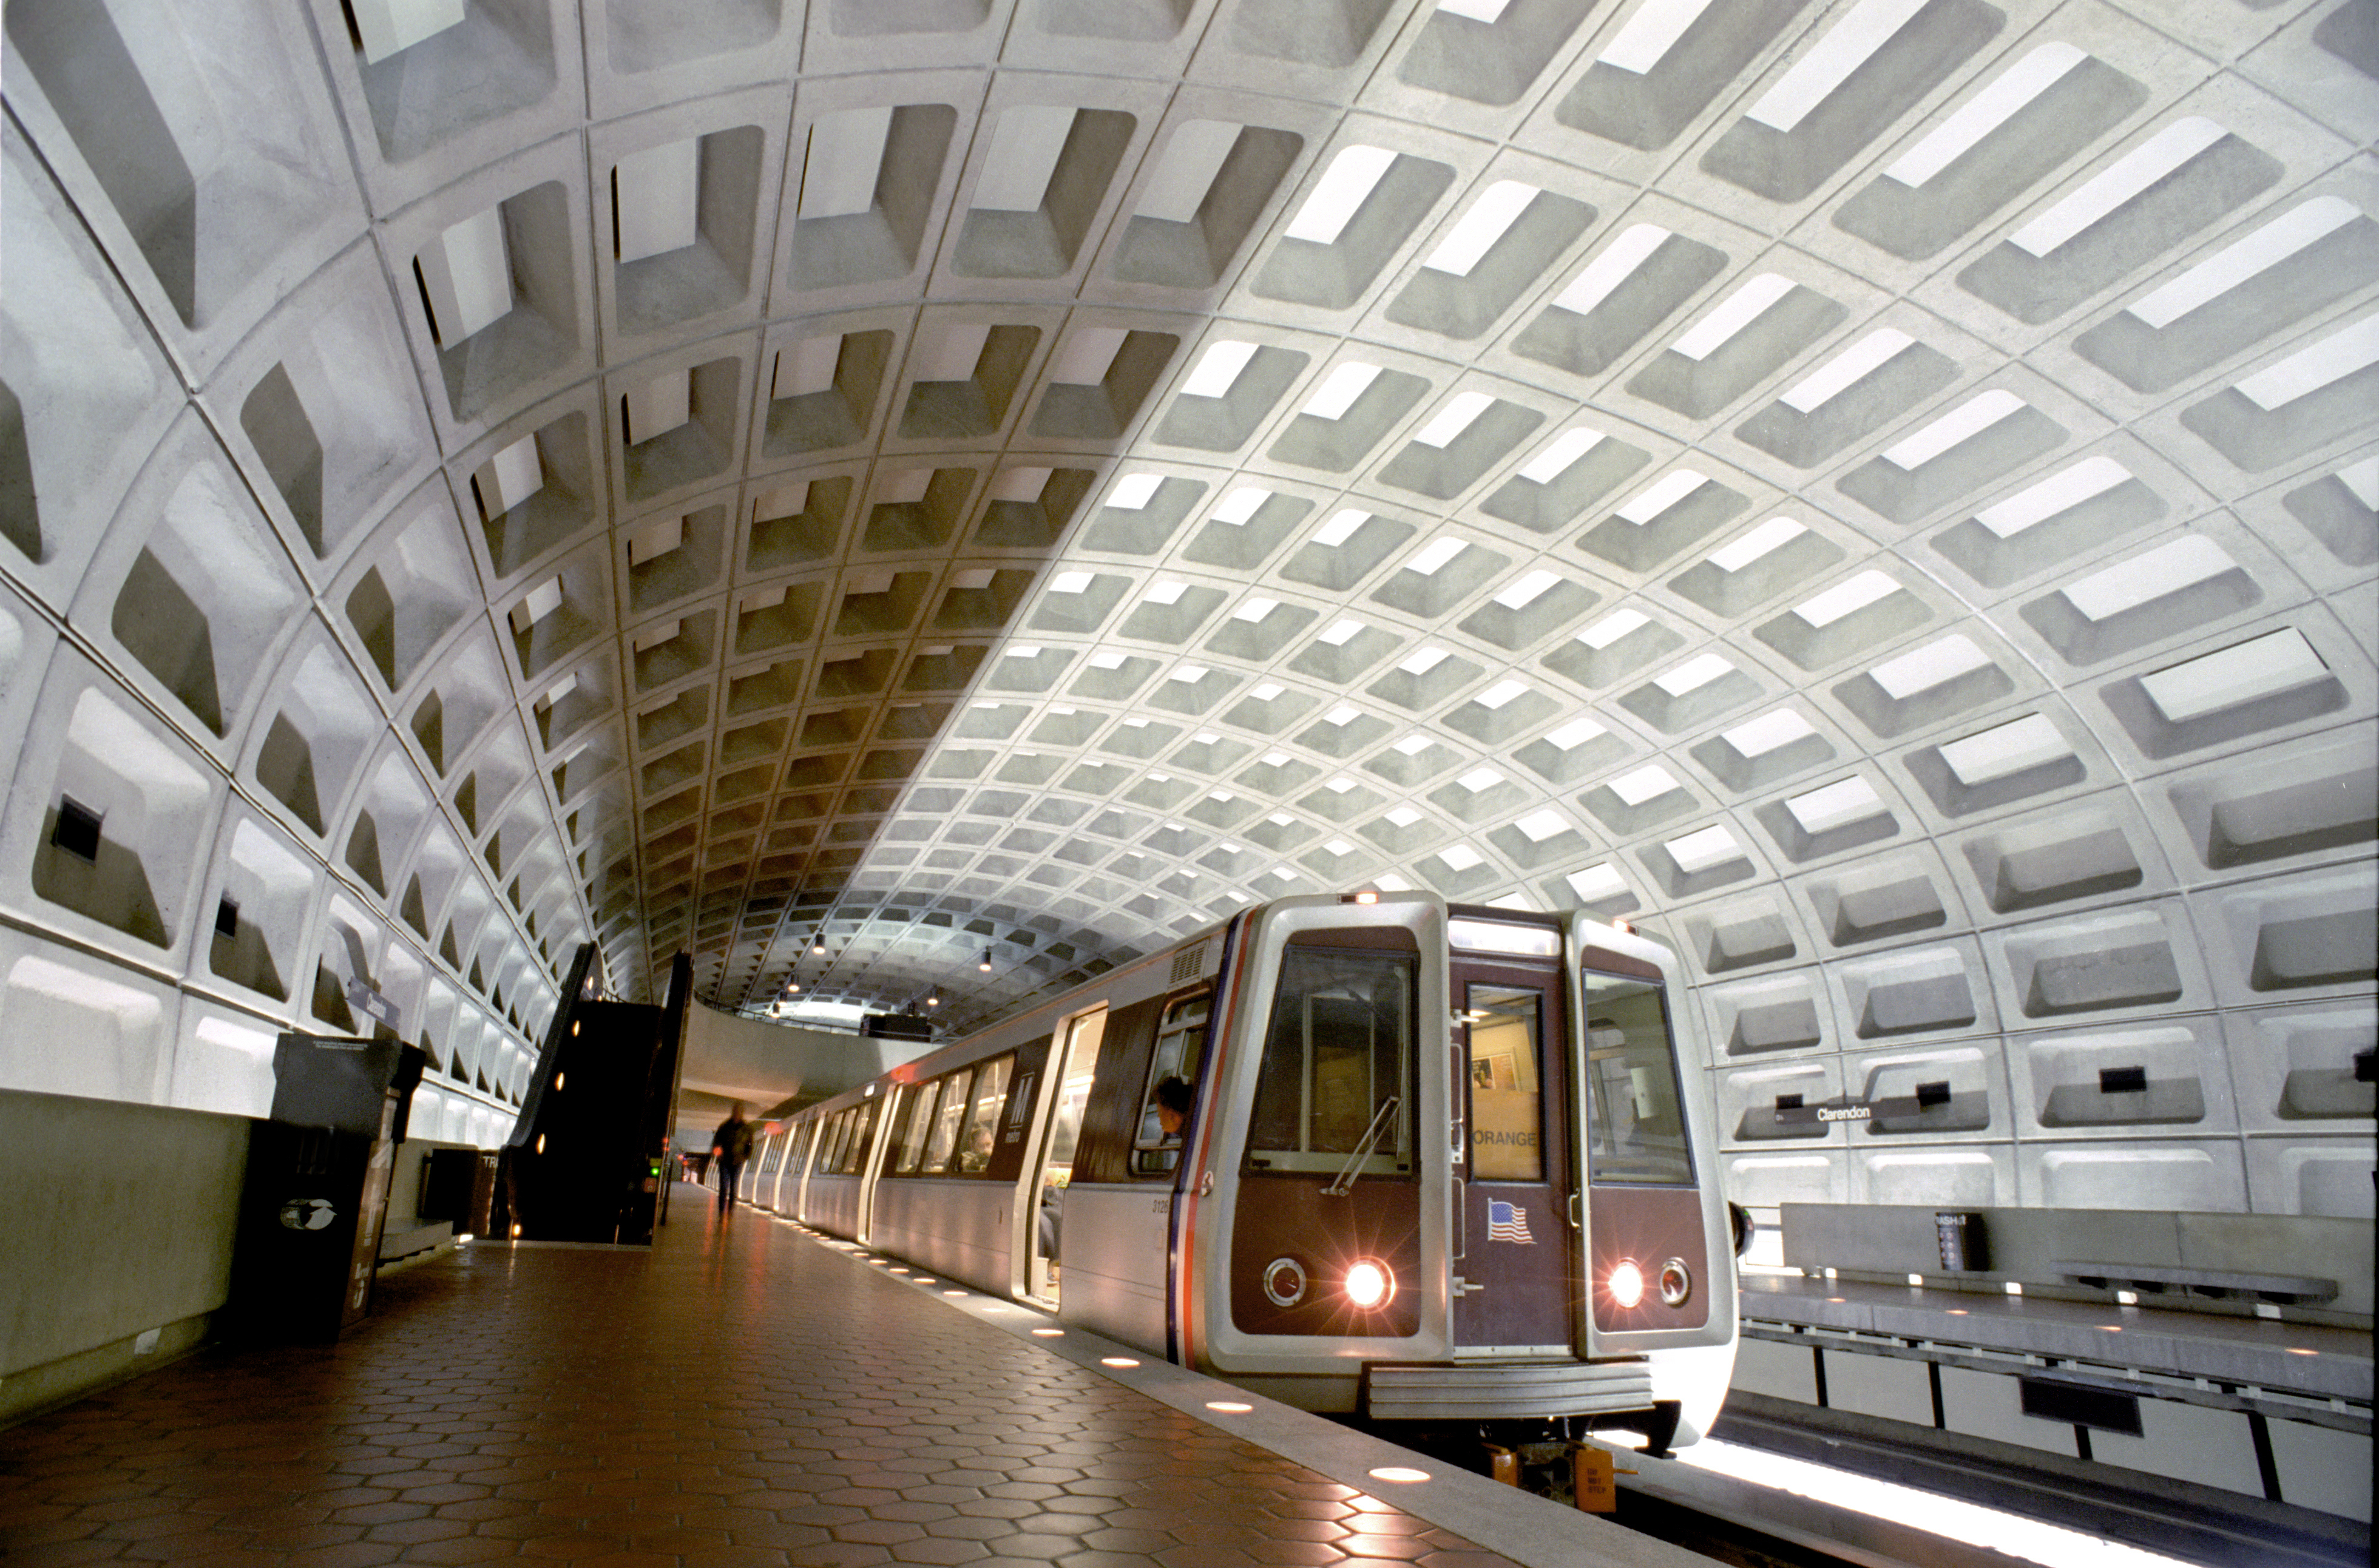 All Metro Rides After 8 . on New Year's Eve Will Be Free – NBC4  Washington